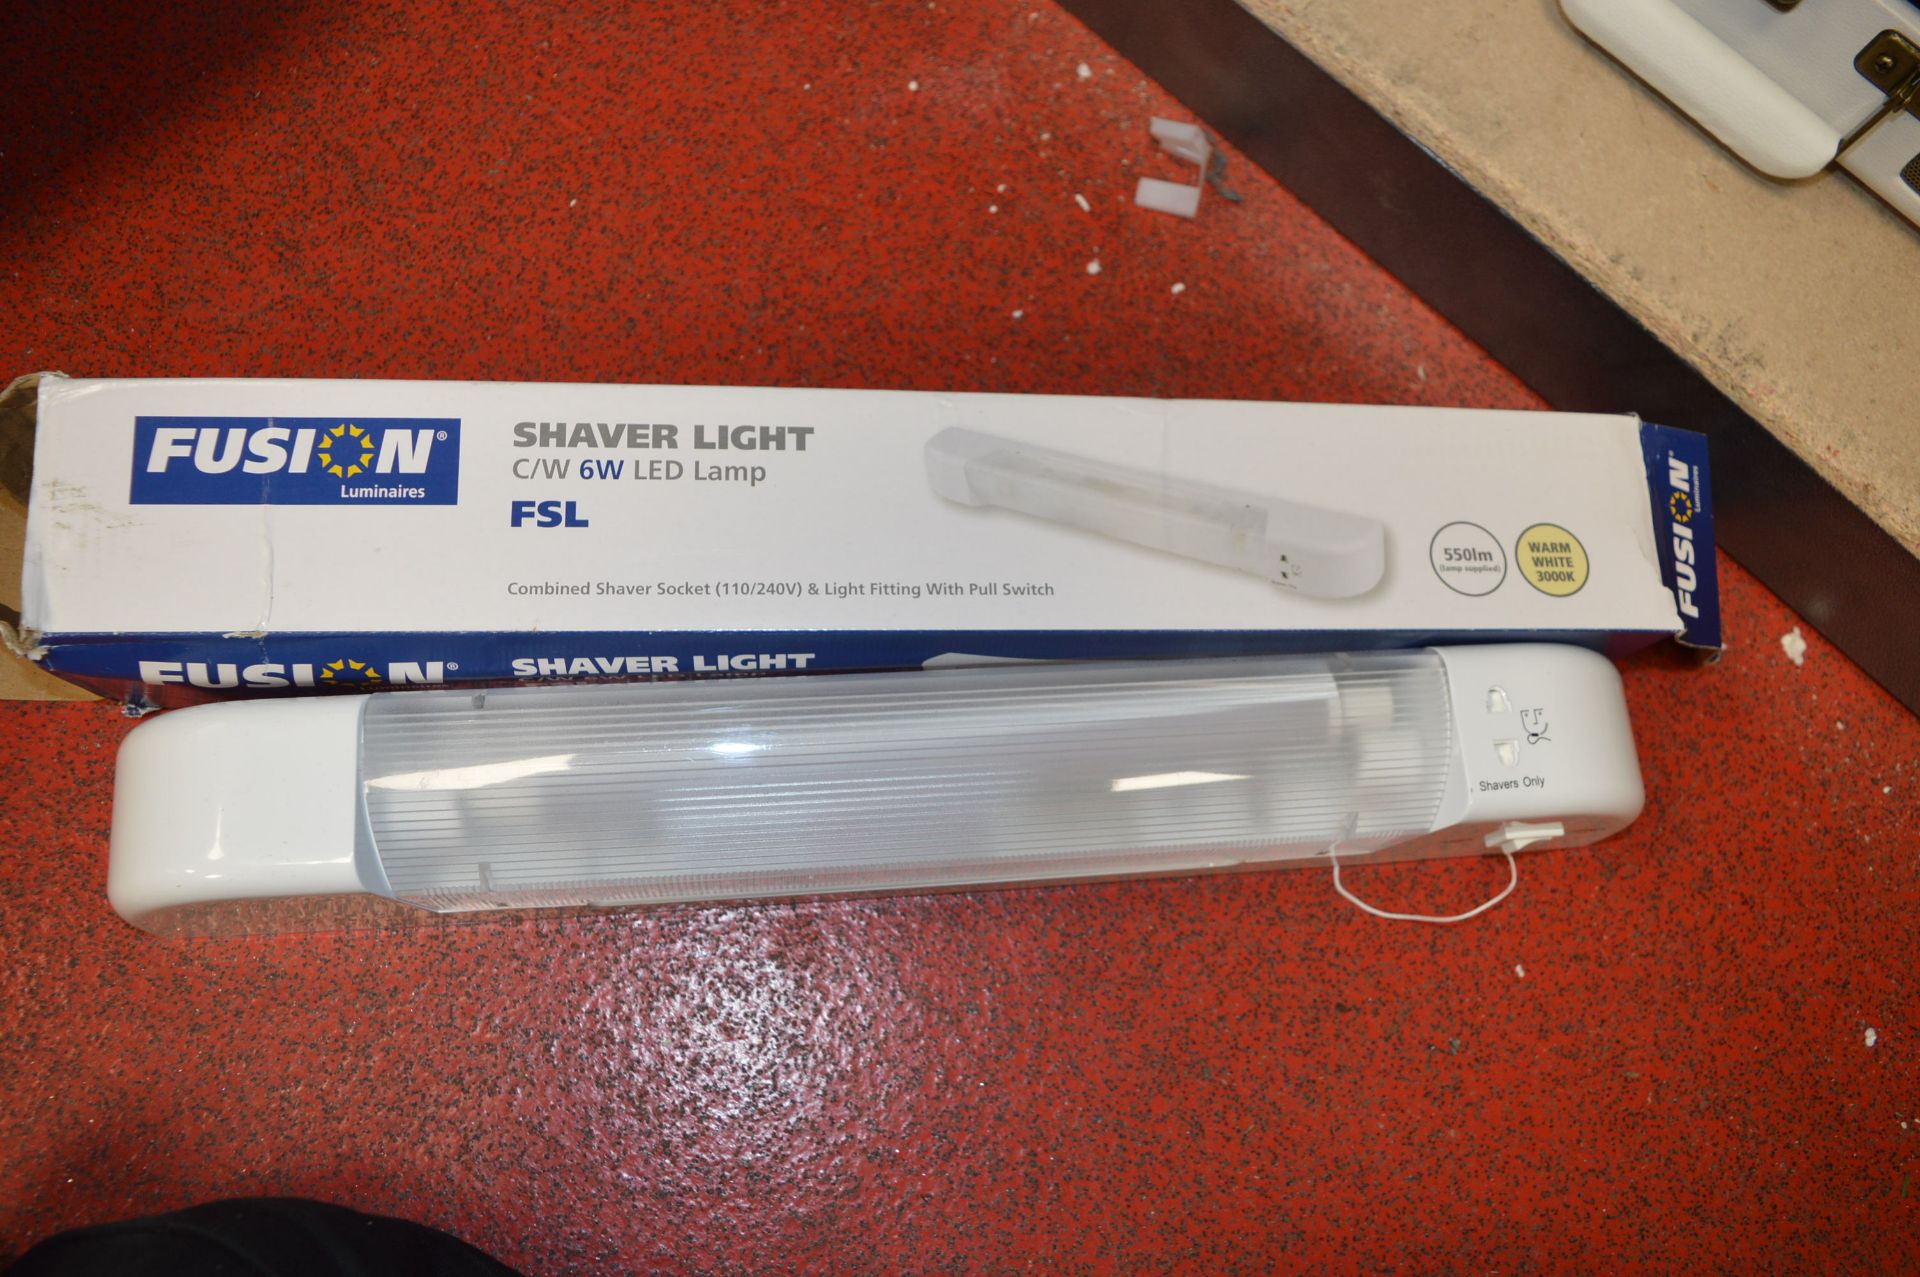 *Ten Fusion Shaver Lights LED Lamp - Image 2 of 2